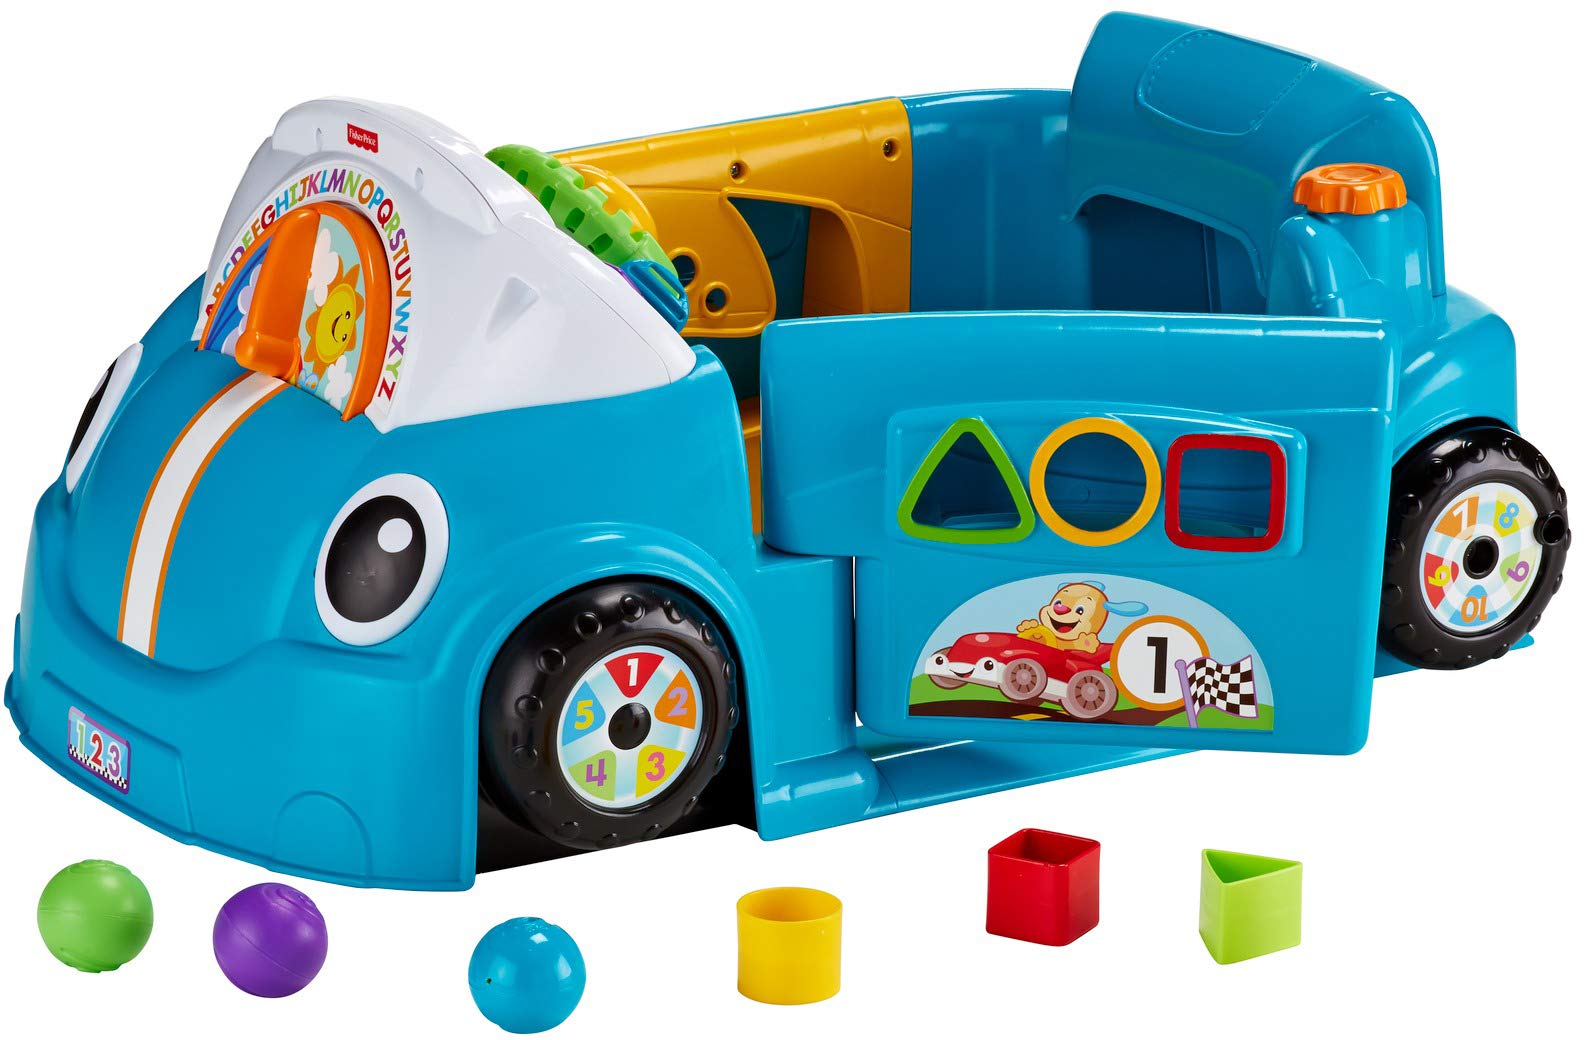 Fisher-Price Laugh & Learn Baby Activity Center, Crawl Around Car, Interactive Playset with Smart Stages for Infants & Toddlers, Blue (Amazon Exclusive)